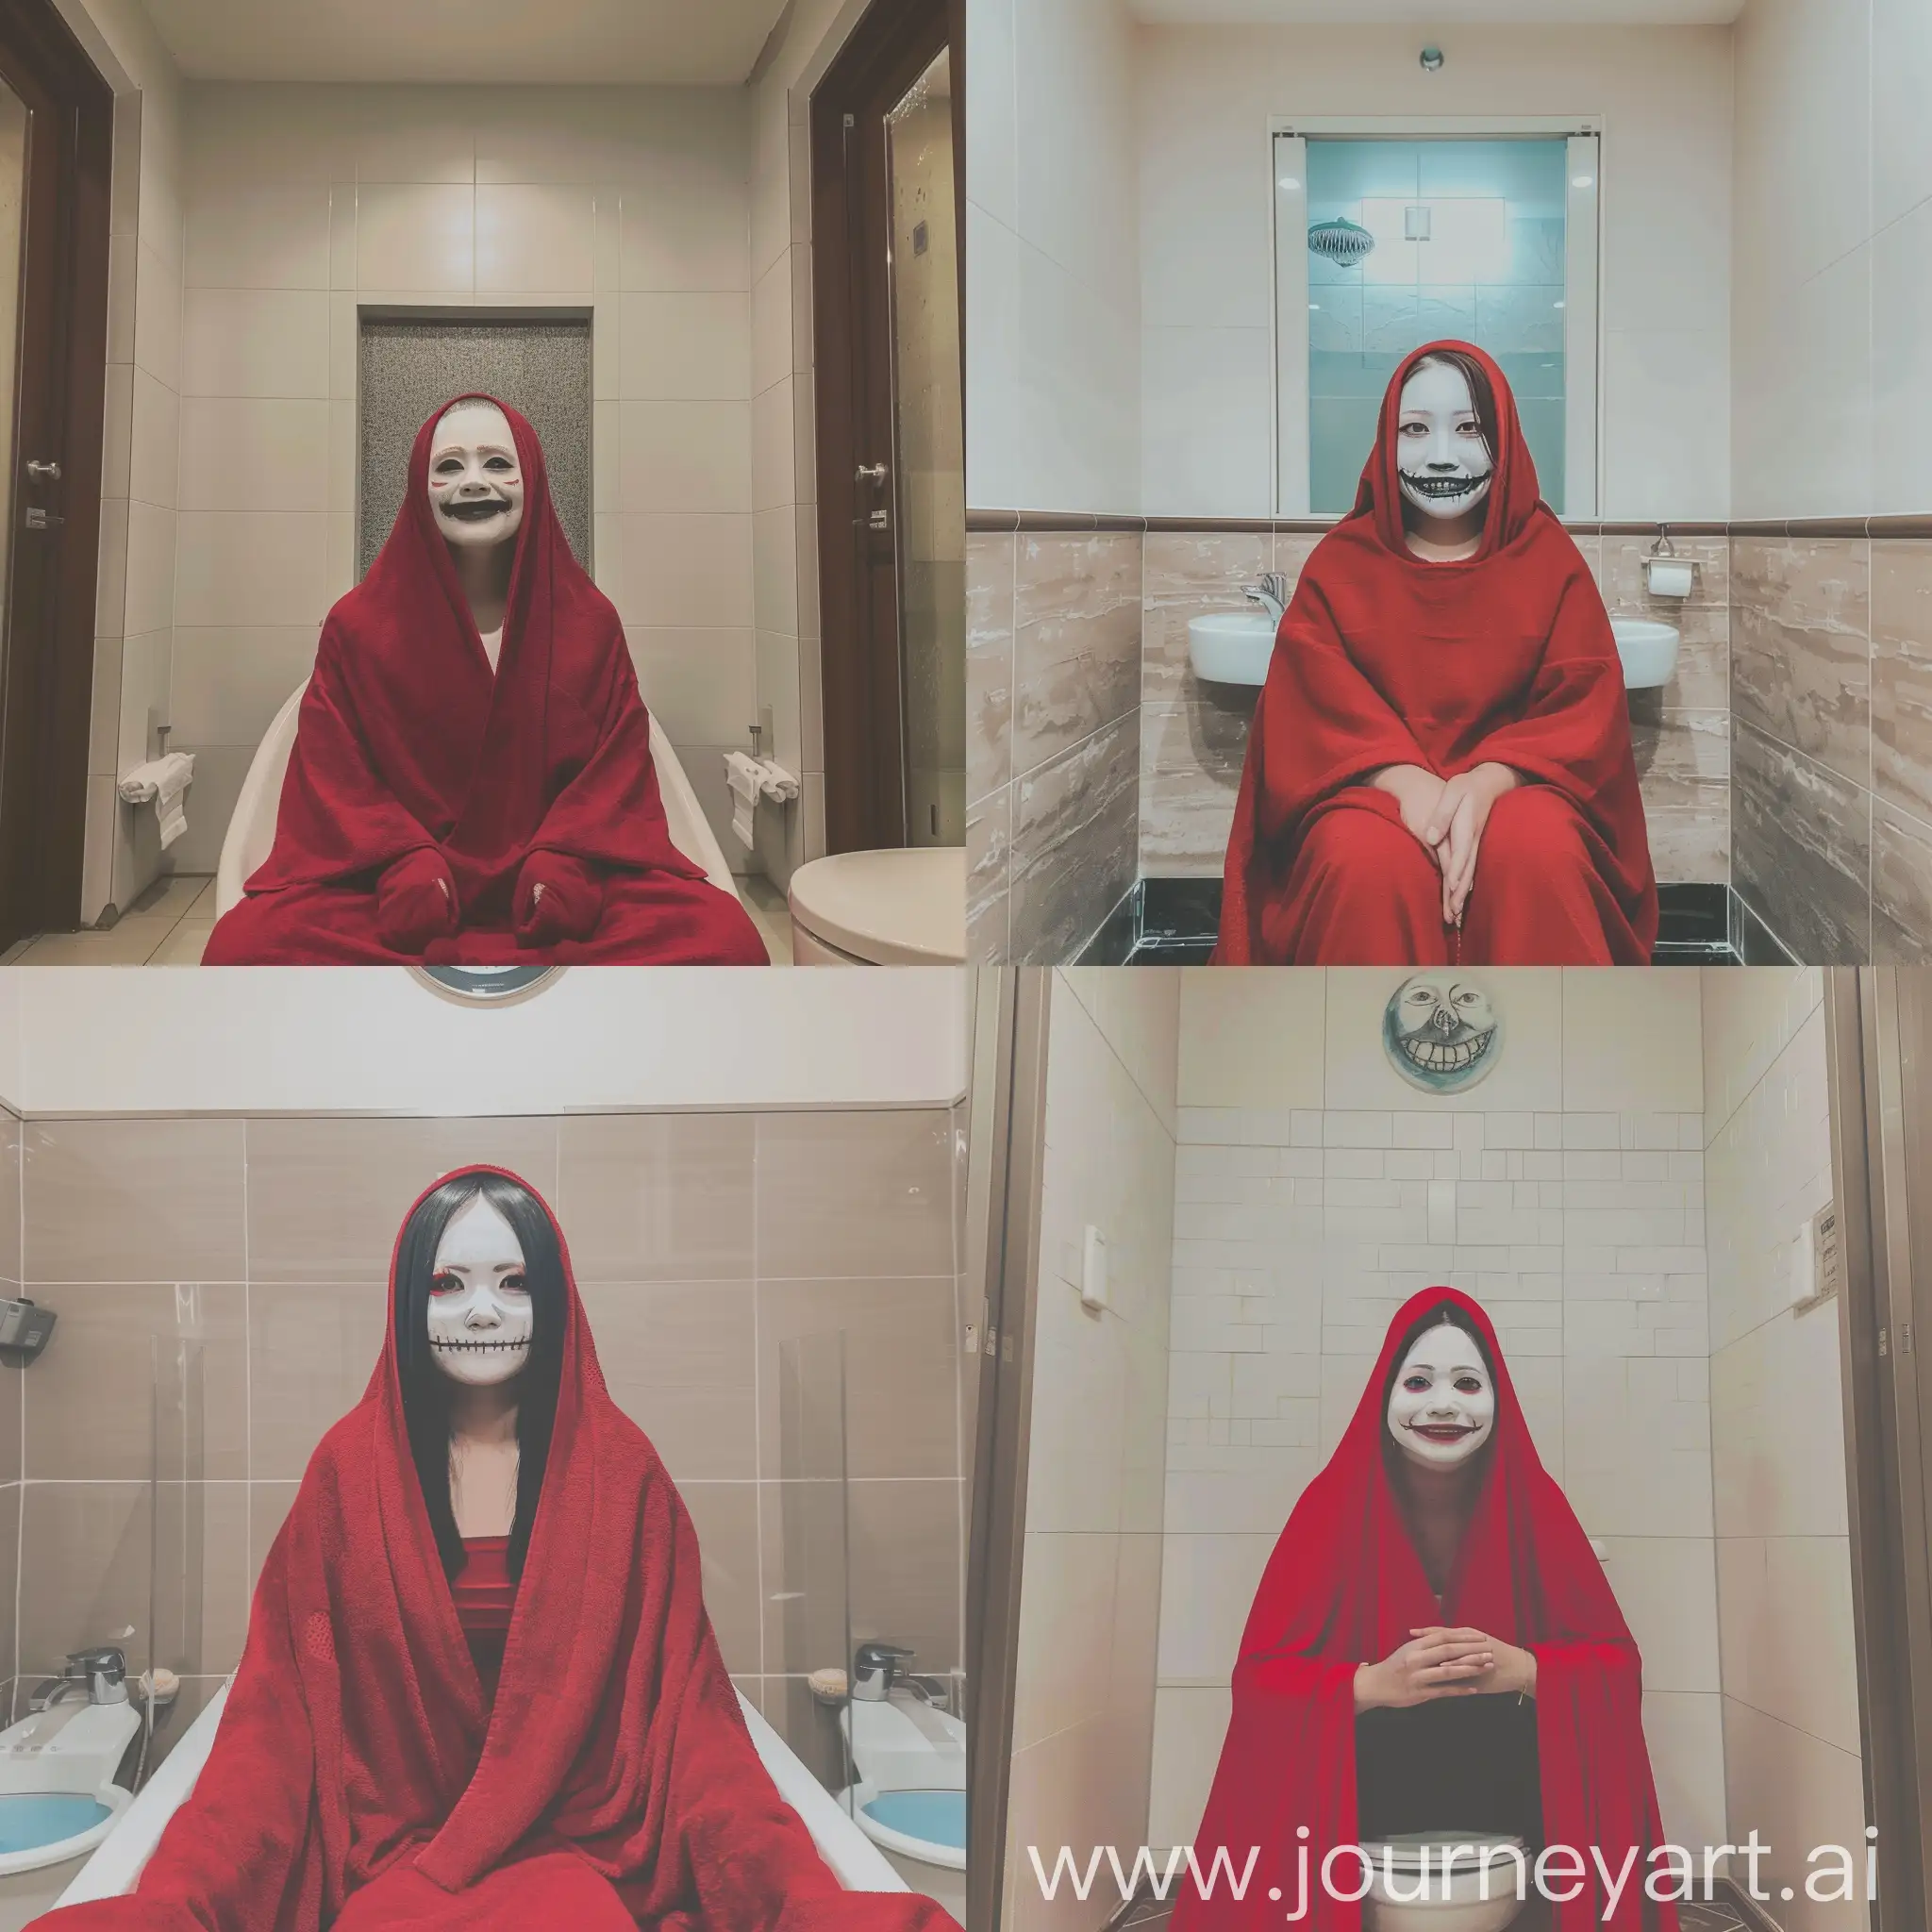 Sinister-Japanese-Folklore-Character-in-Red-Cloak-in-Bathroom